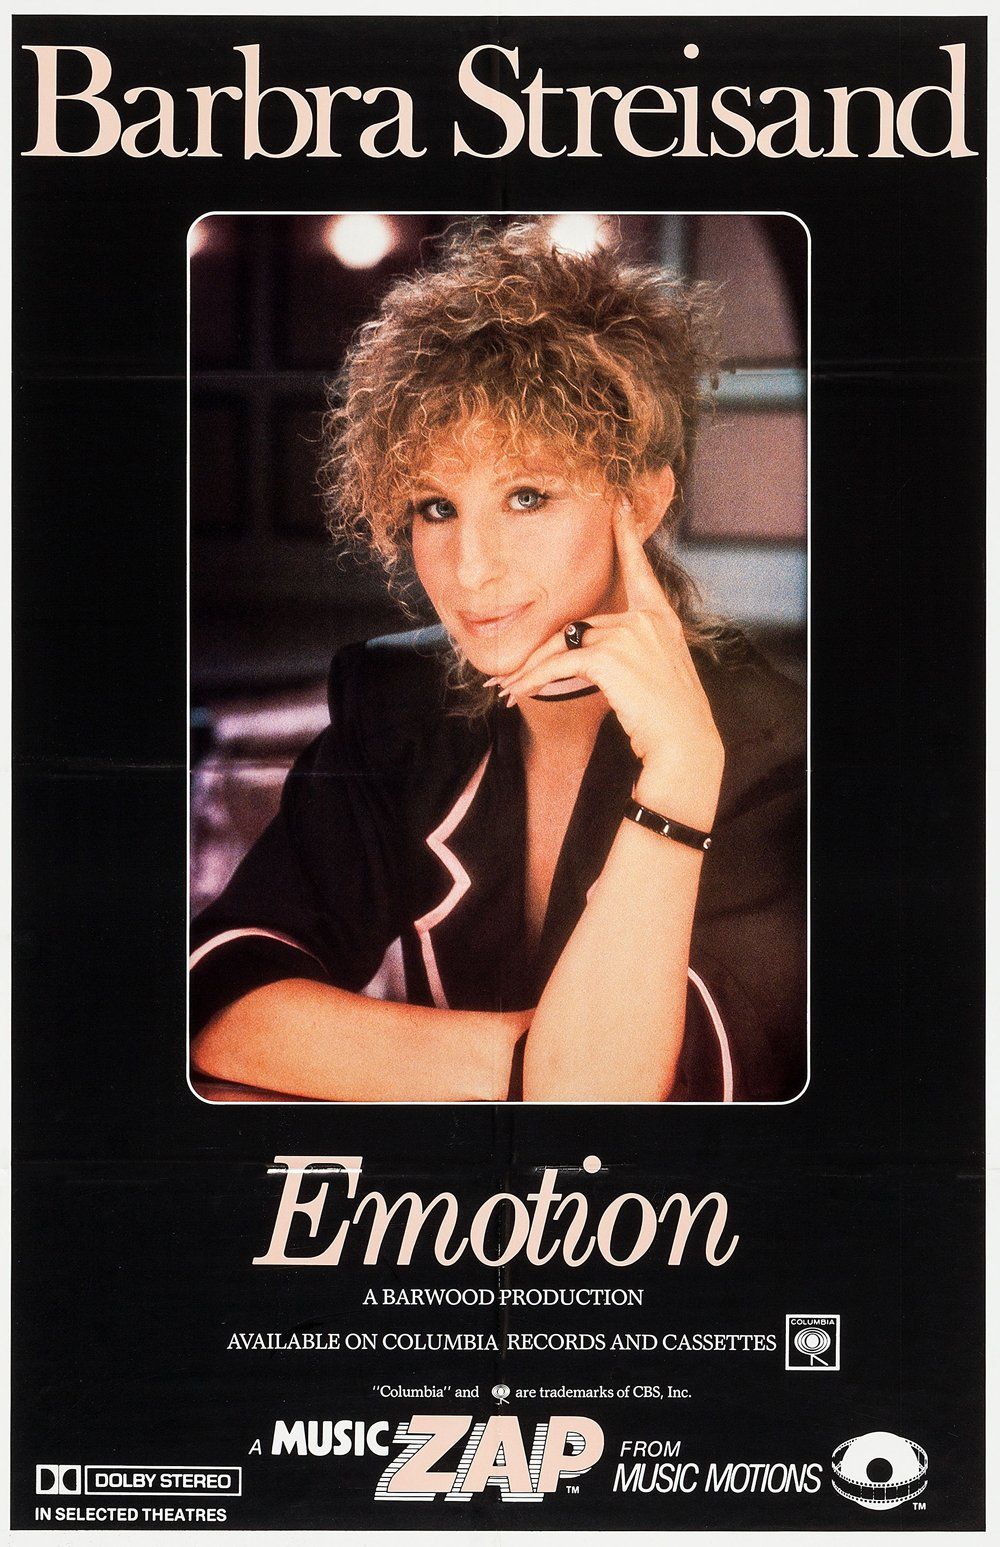 Theatrical poster for Streisand's music video of 